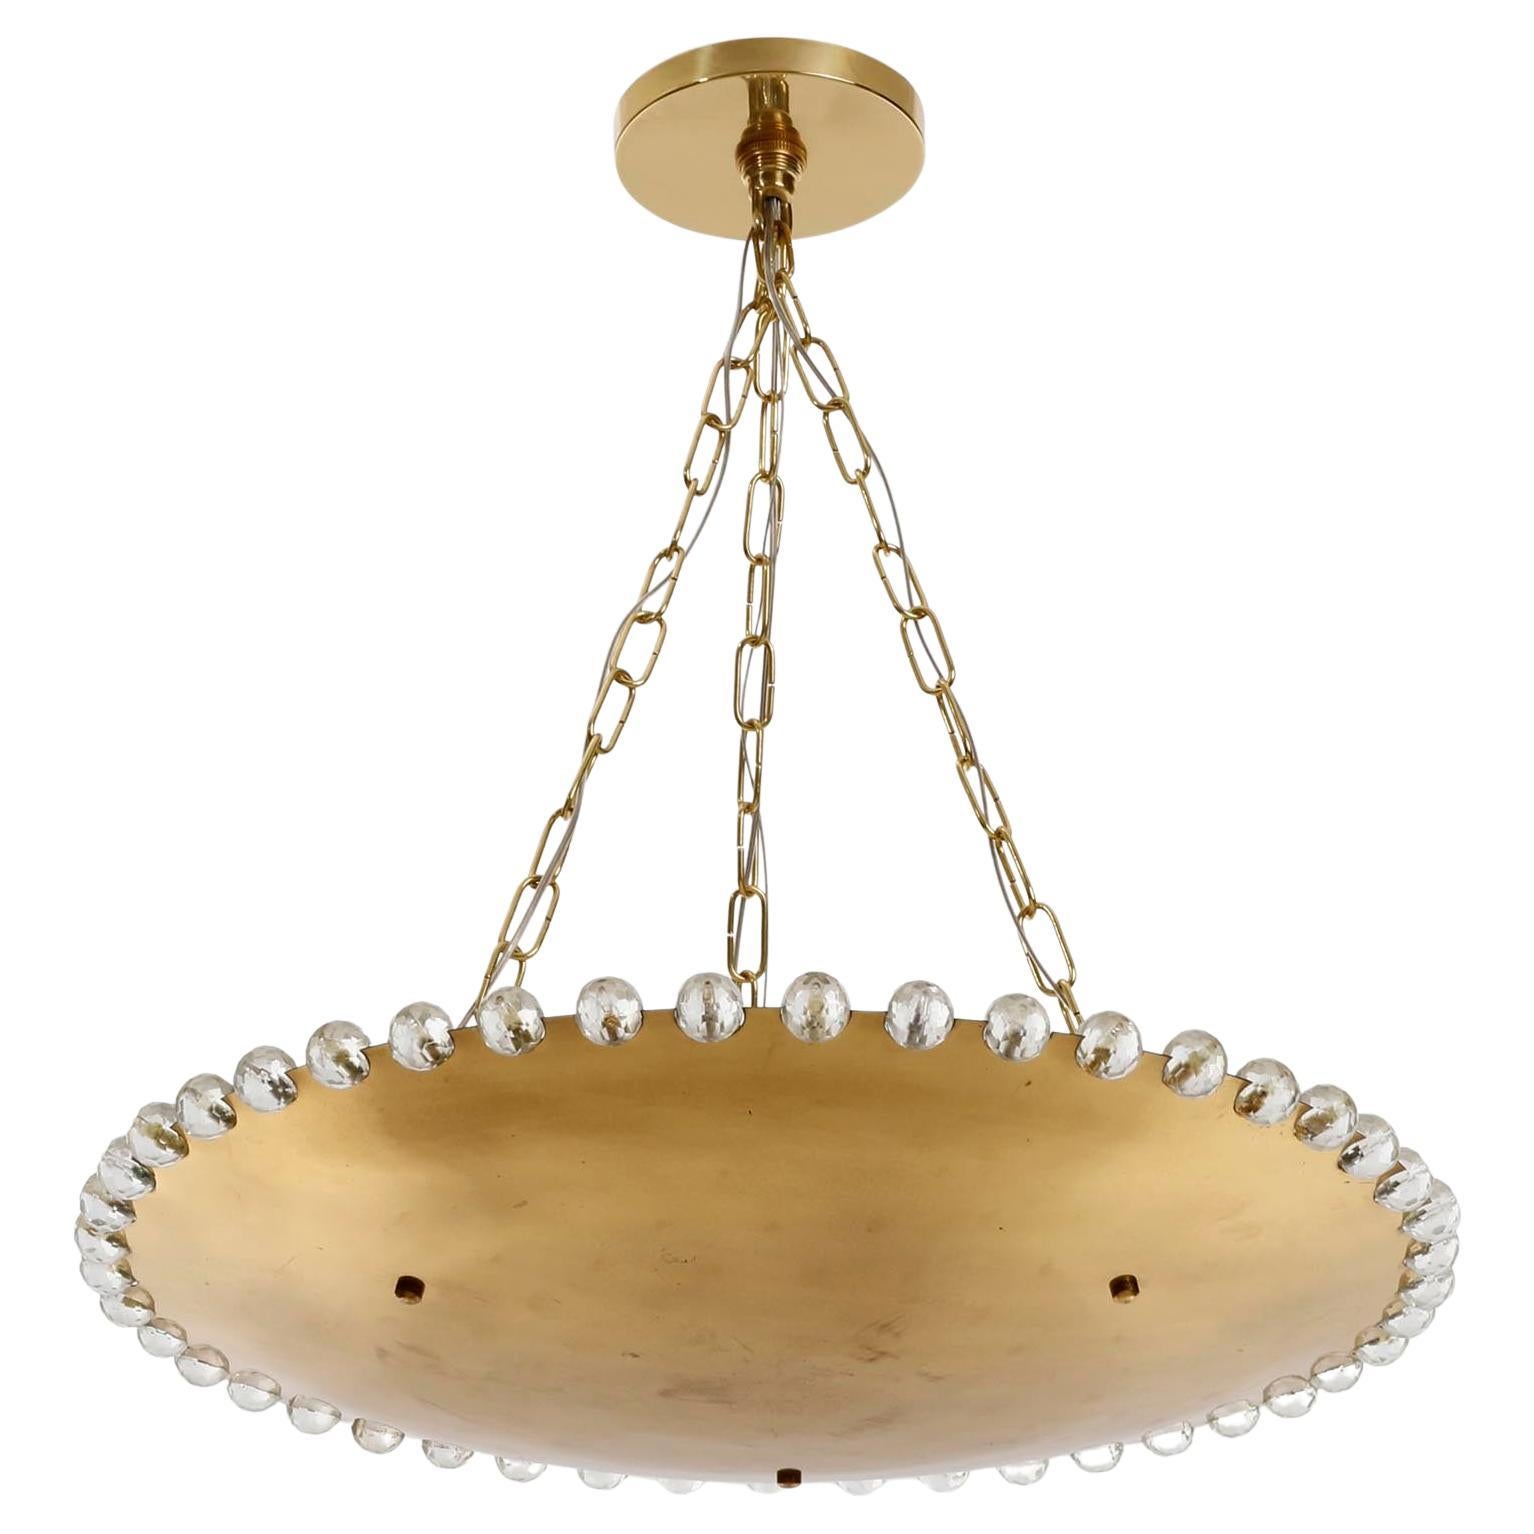 A gorgeous uplight chandelier by Rupert Nikoll, Vienna, Austria, manufactured in Mid-Century, circa 1960 (late 1950s or early 1960s).
A brass bowl made of solid polished brass which has an aged surface in a rich and warm tone and lovely patina.
The